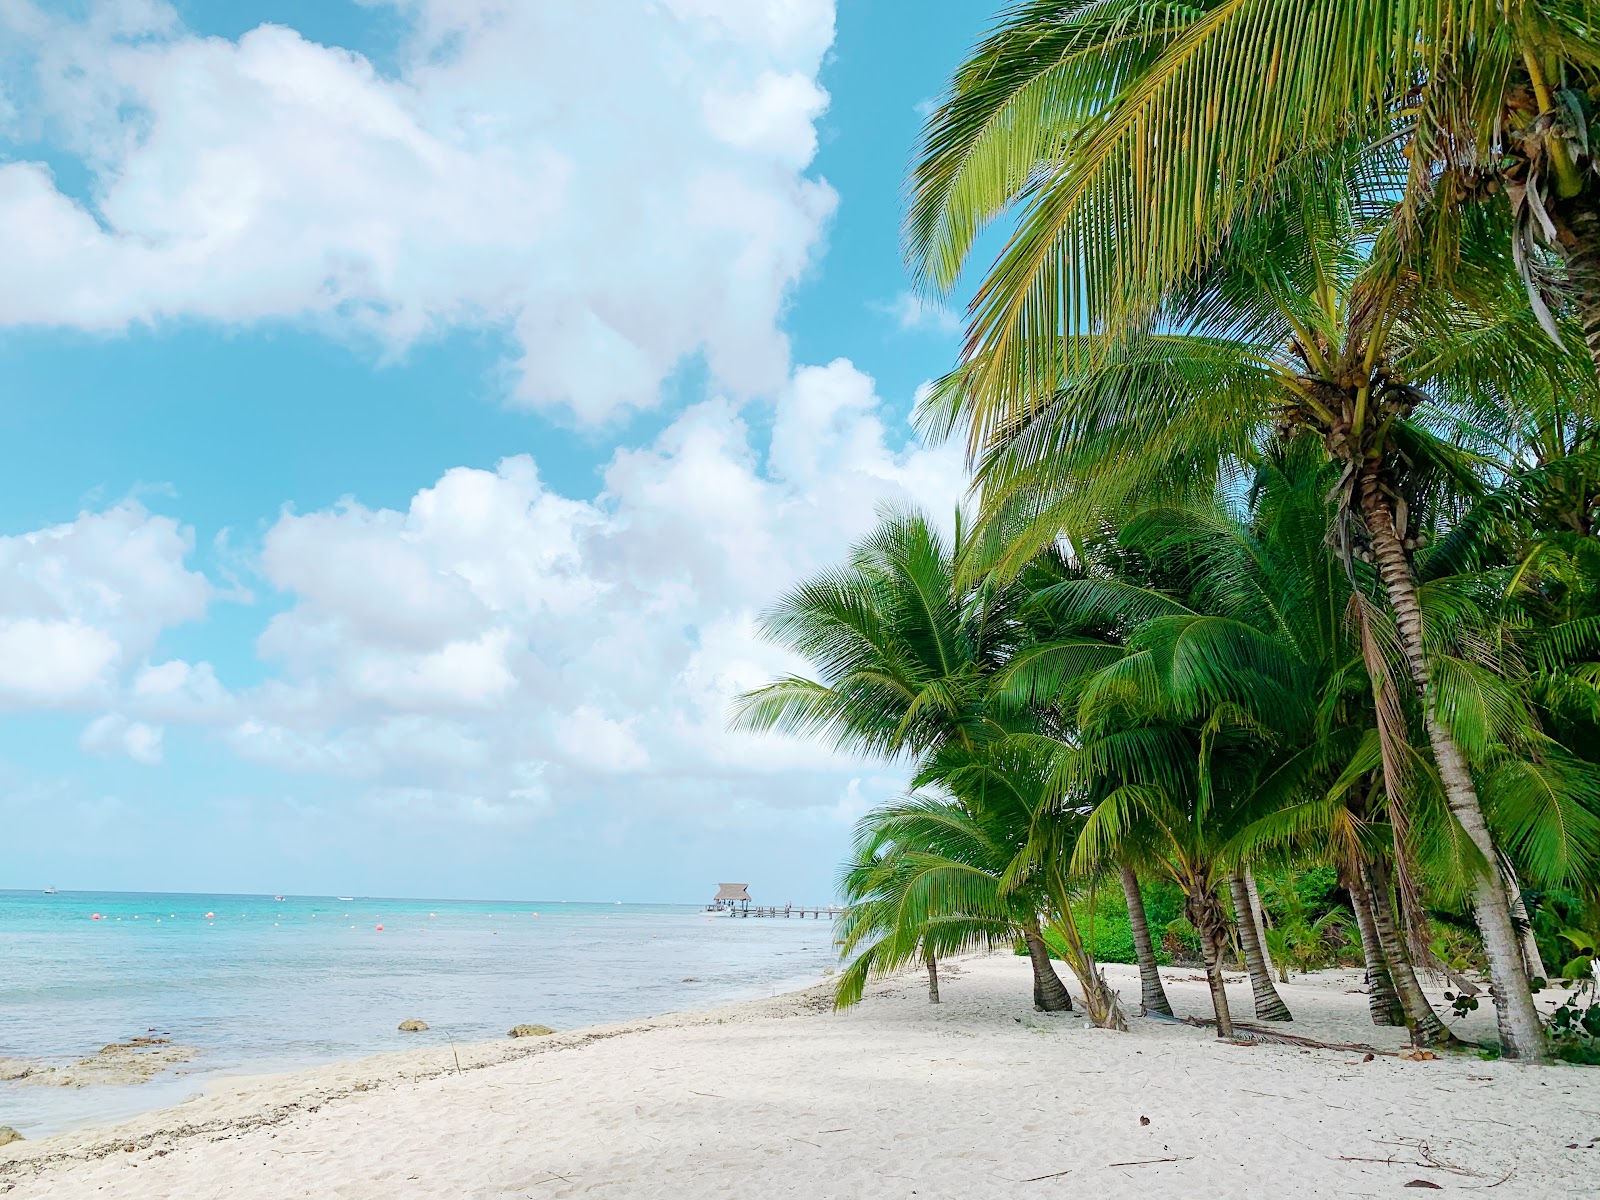 Cozumel, Mexico is a popular destination for relaxing and safe vacations. 
pictured: A Cozumel beach with white sand and lush green palm trees